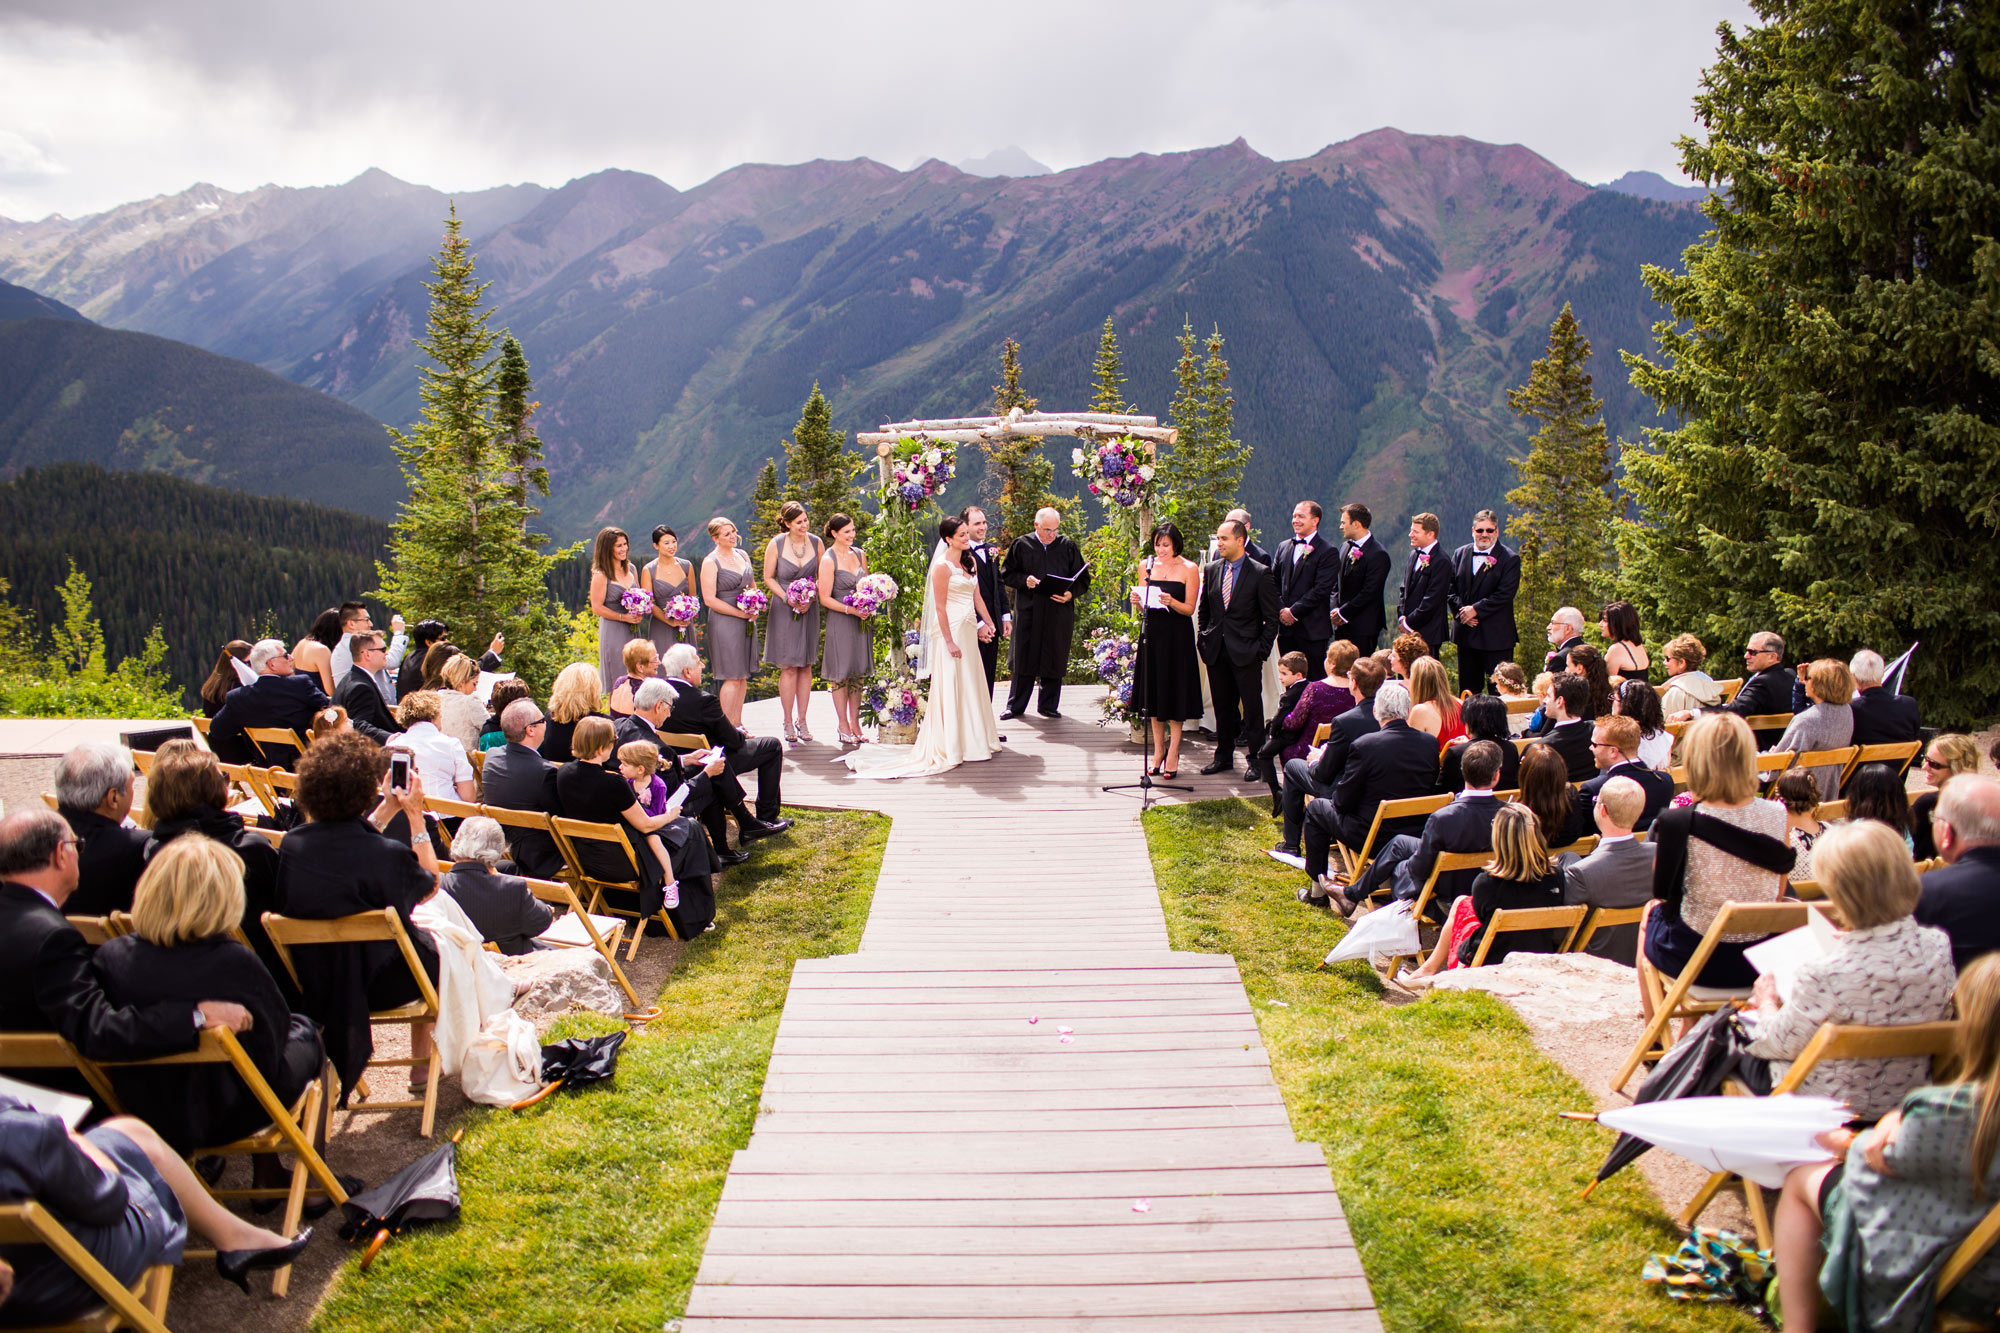 Great Colorado Mountain Wedding Venues in the world The ultimate guide 